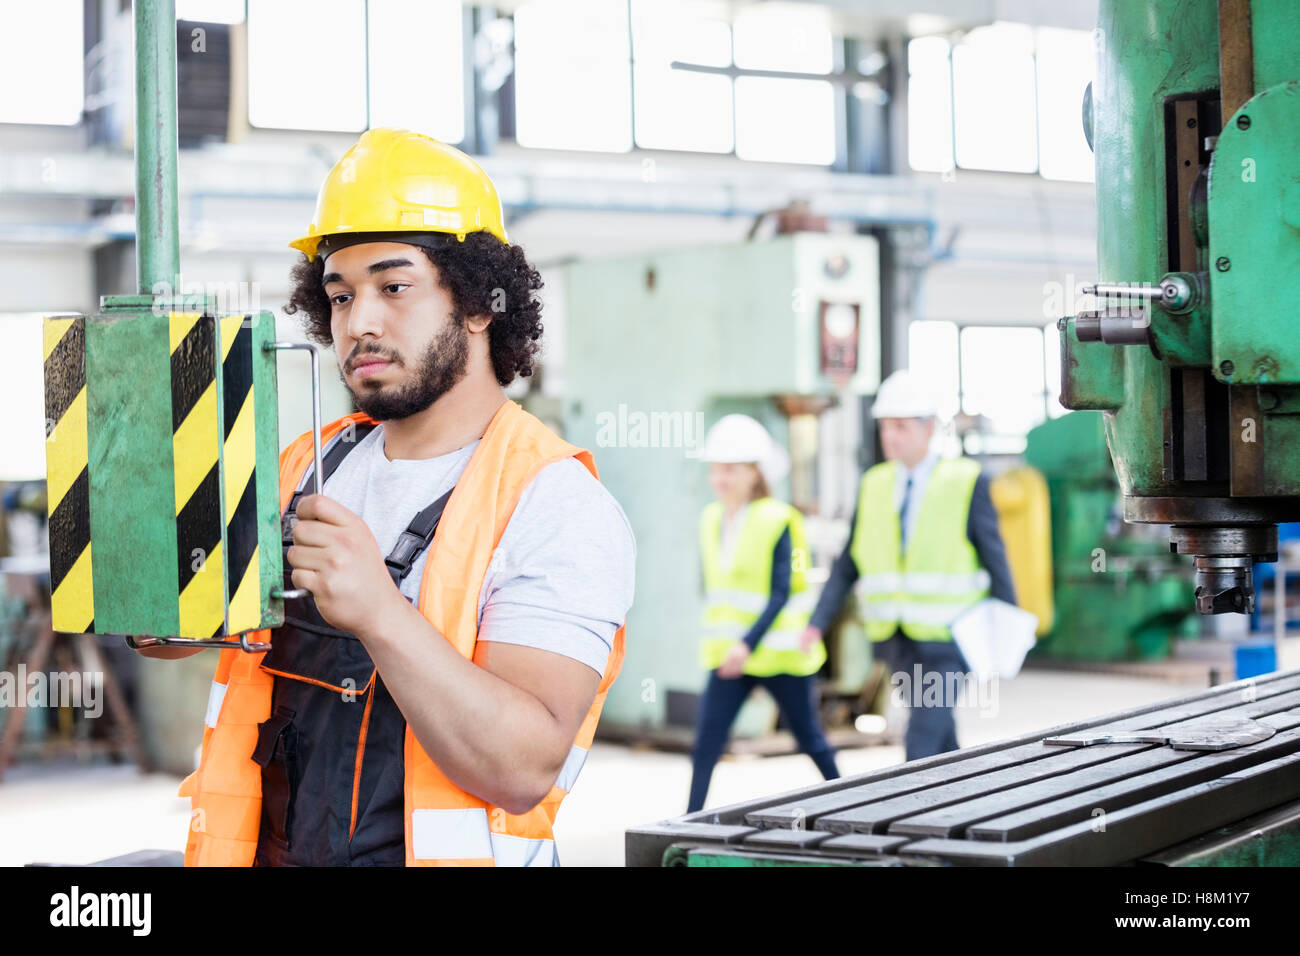 Young manual worker operating machinery in metal industry Stock Photo